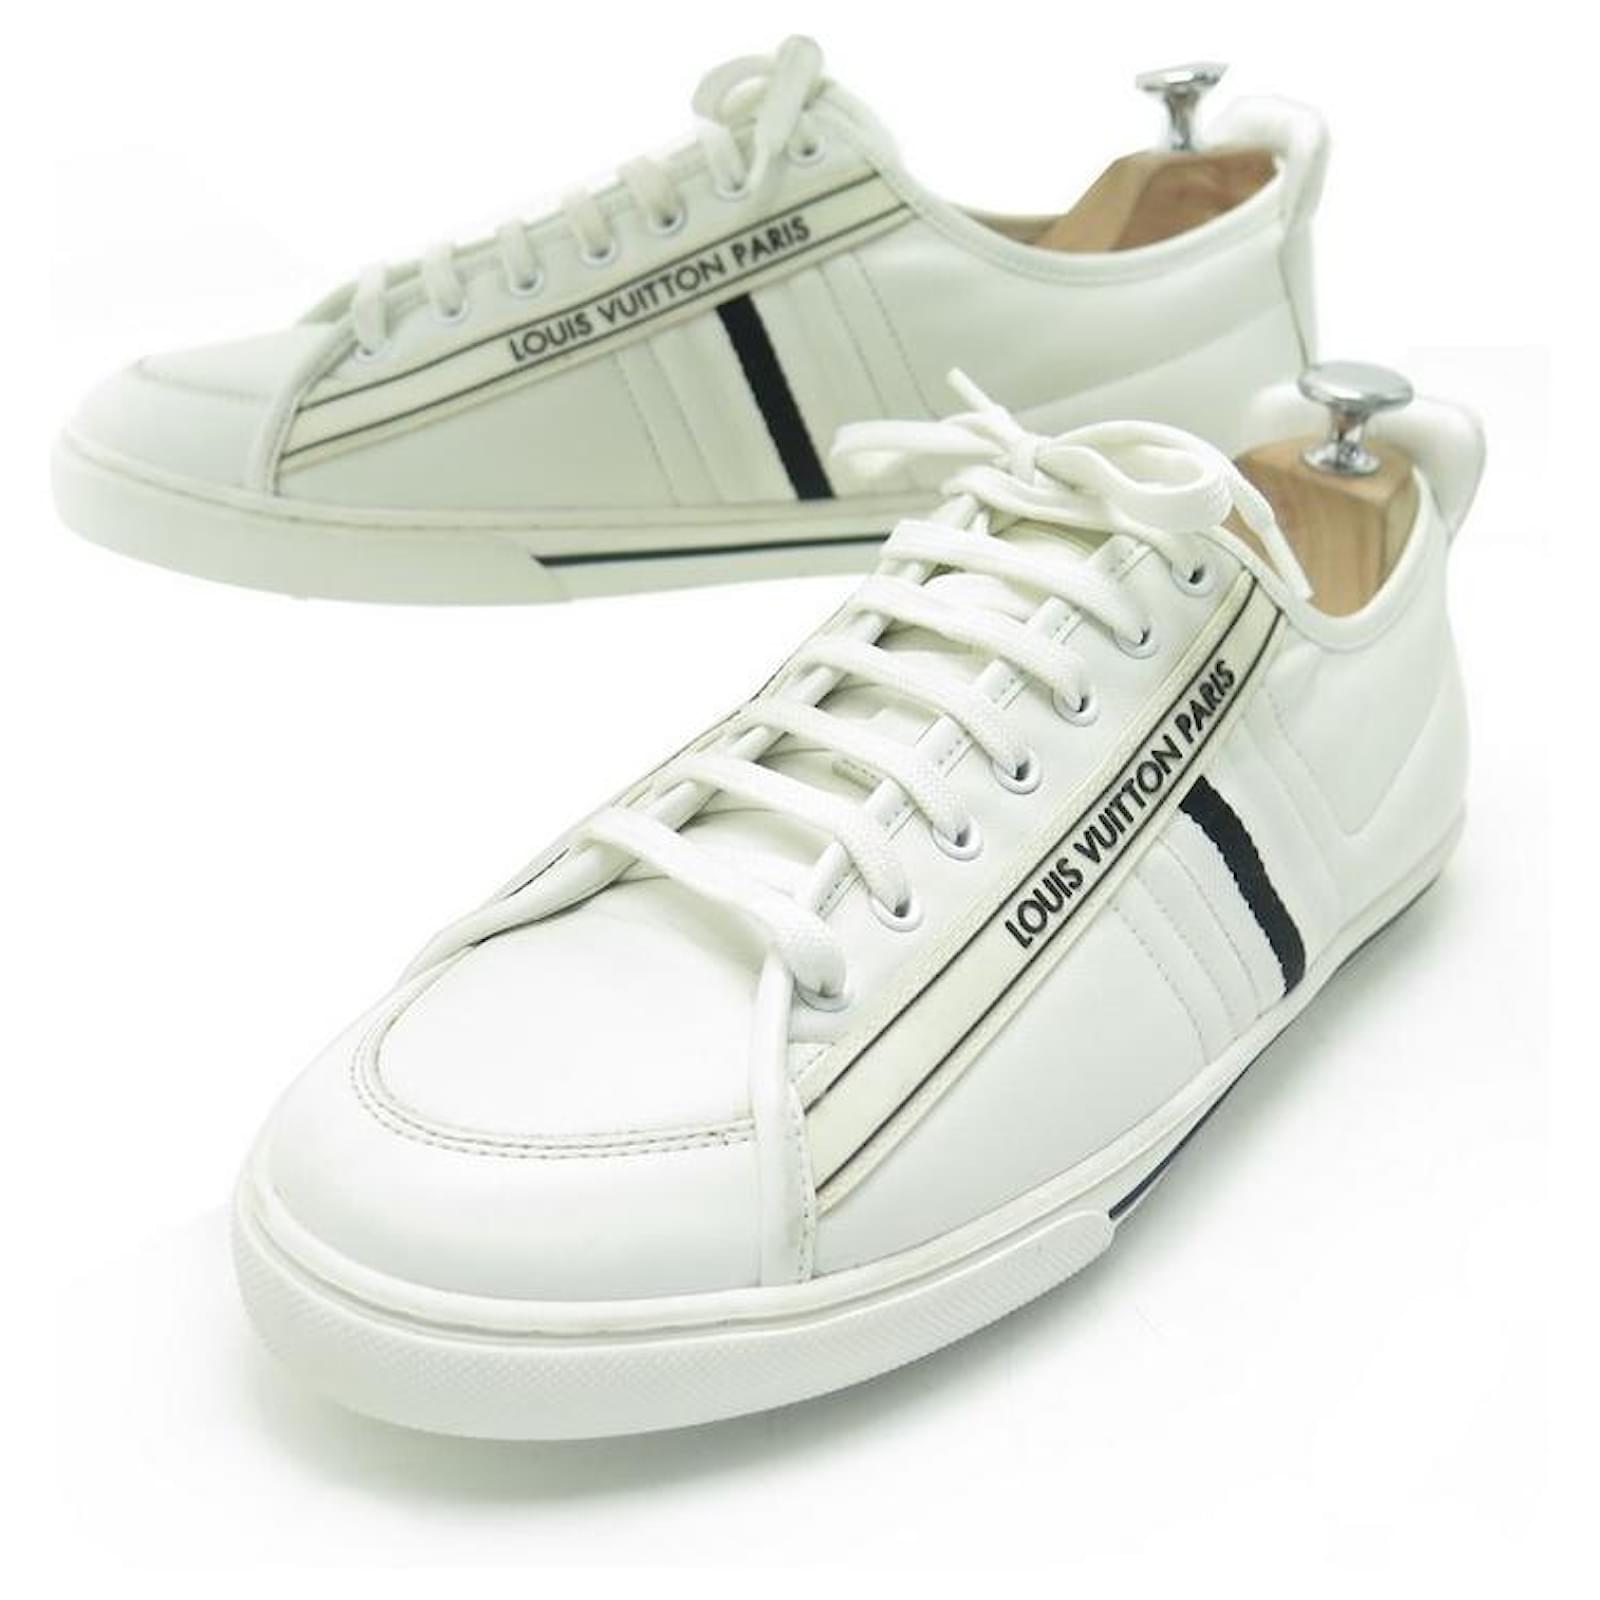 LOUIS VUITTON sneakers SHOES 9 43 IN WHITE LEATHER + BOX SNEAKERS SHOES